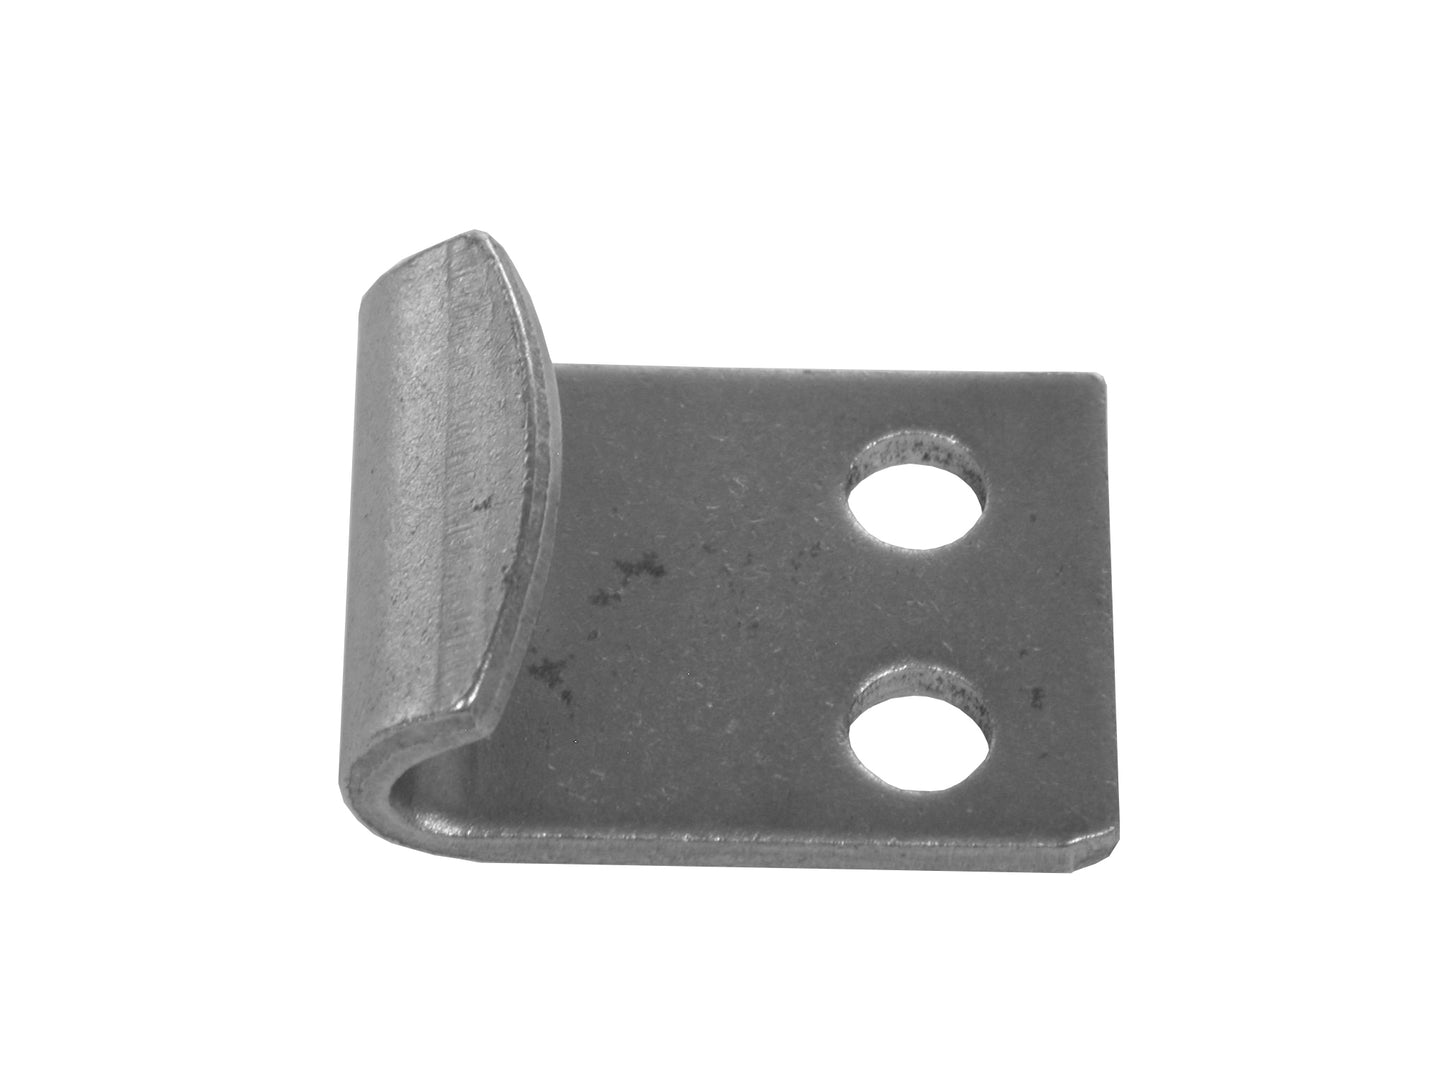 Latch Plate for K-10 Clamp, KC6275